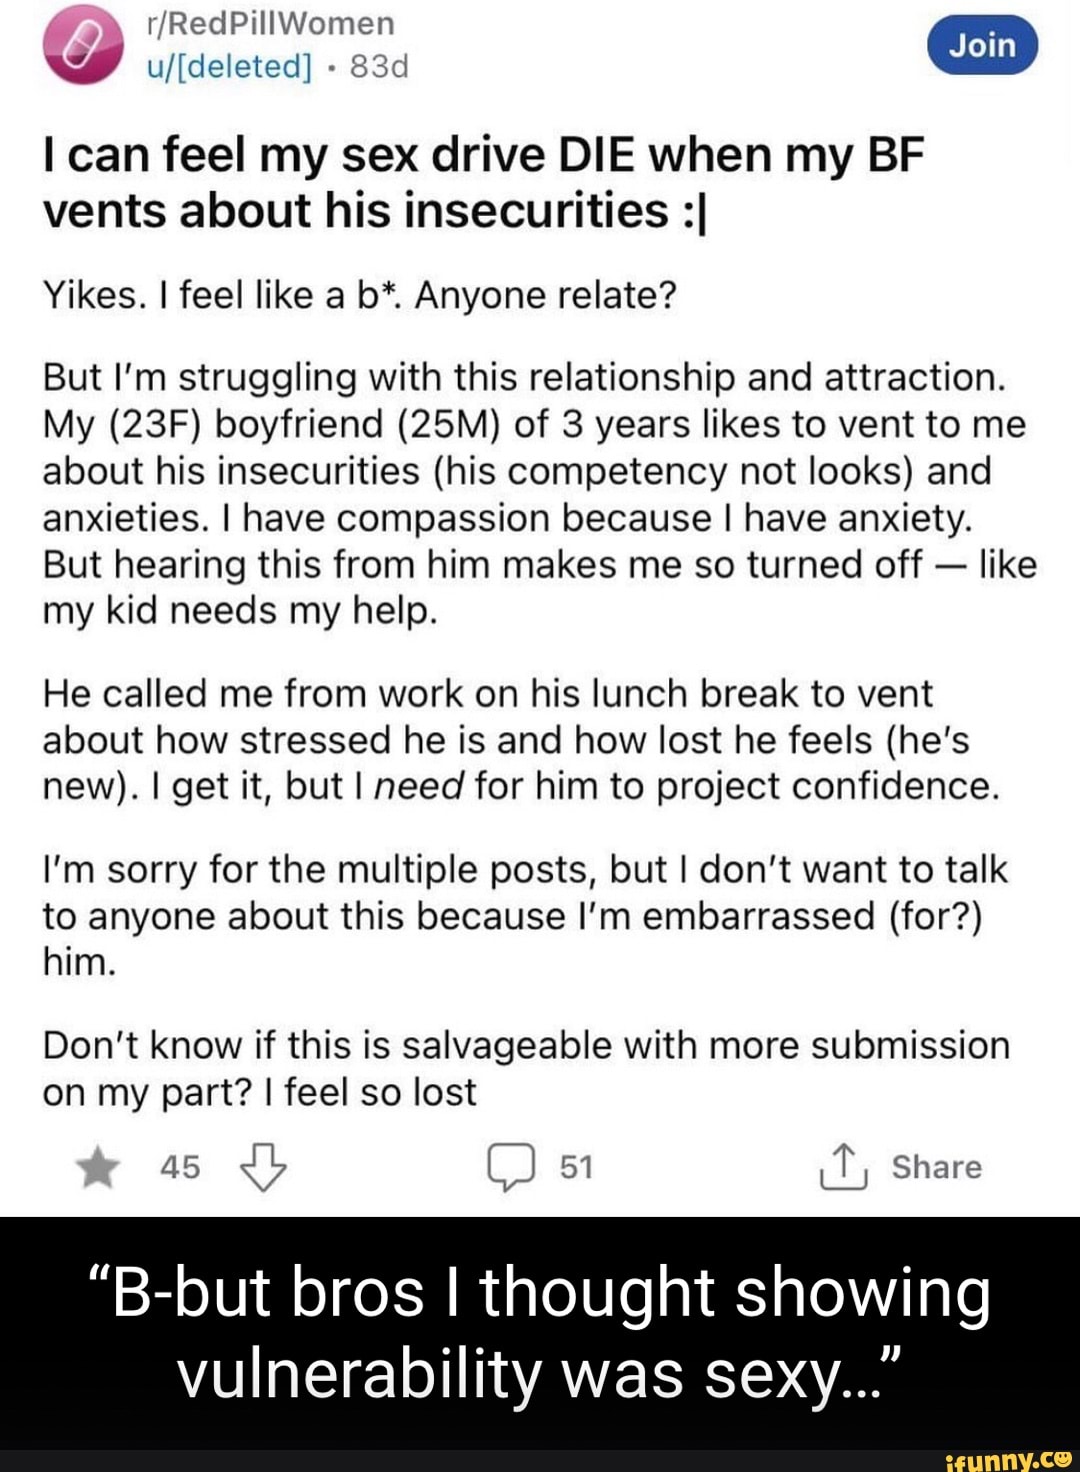 RedPillWomen can feel my sex drive DIE when my BF vents about his insecurities I Yikes. photo